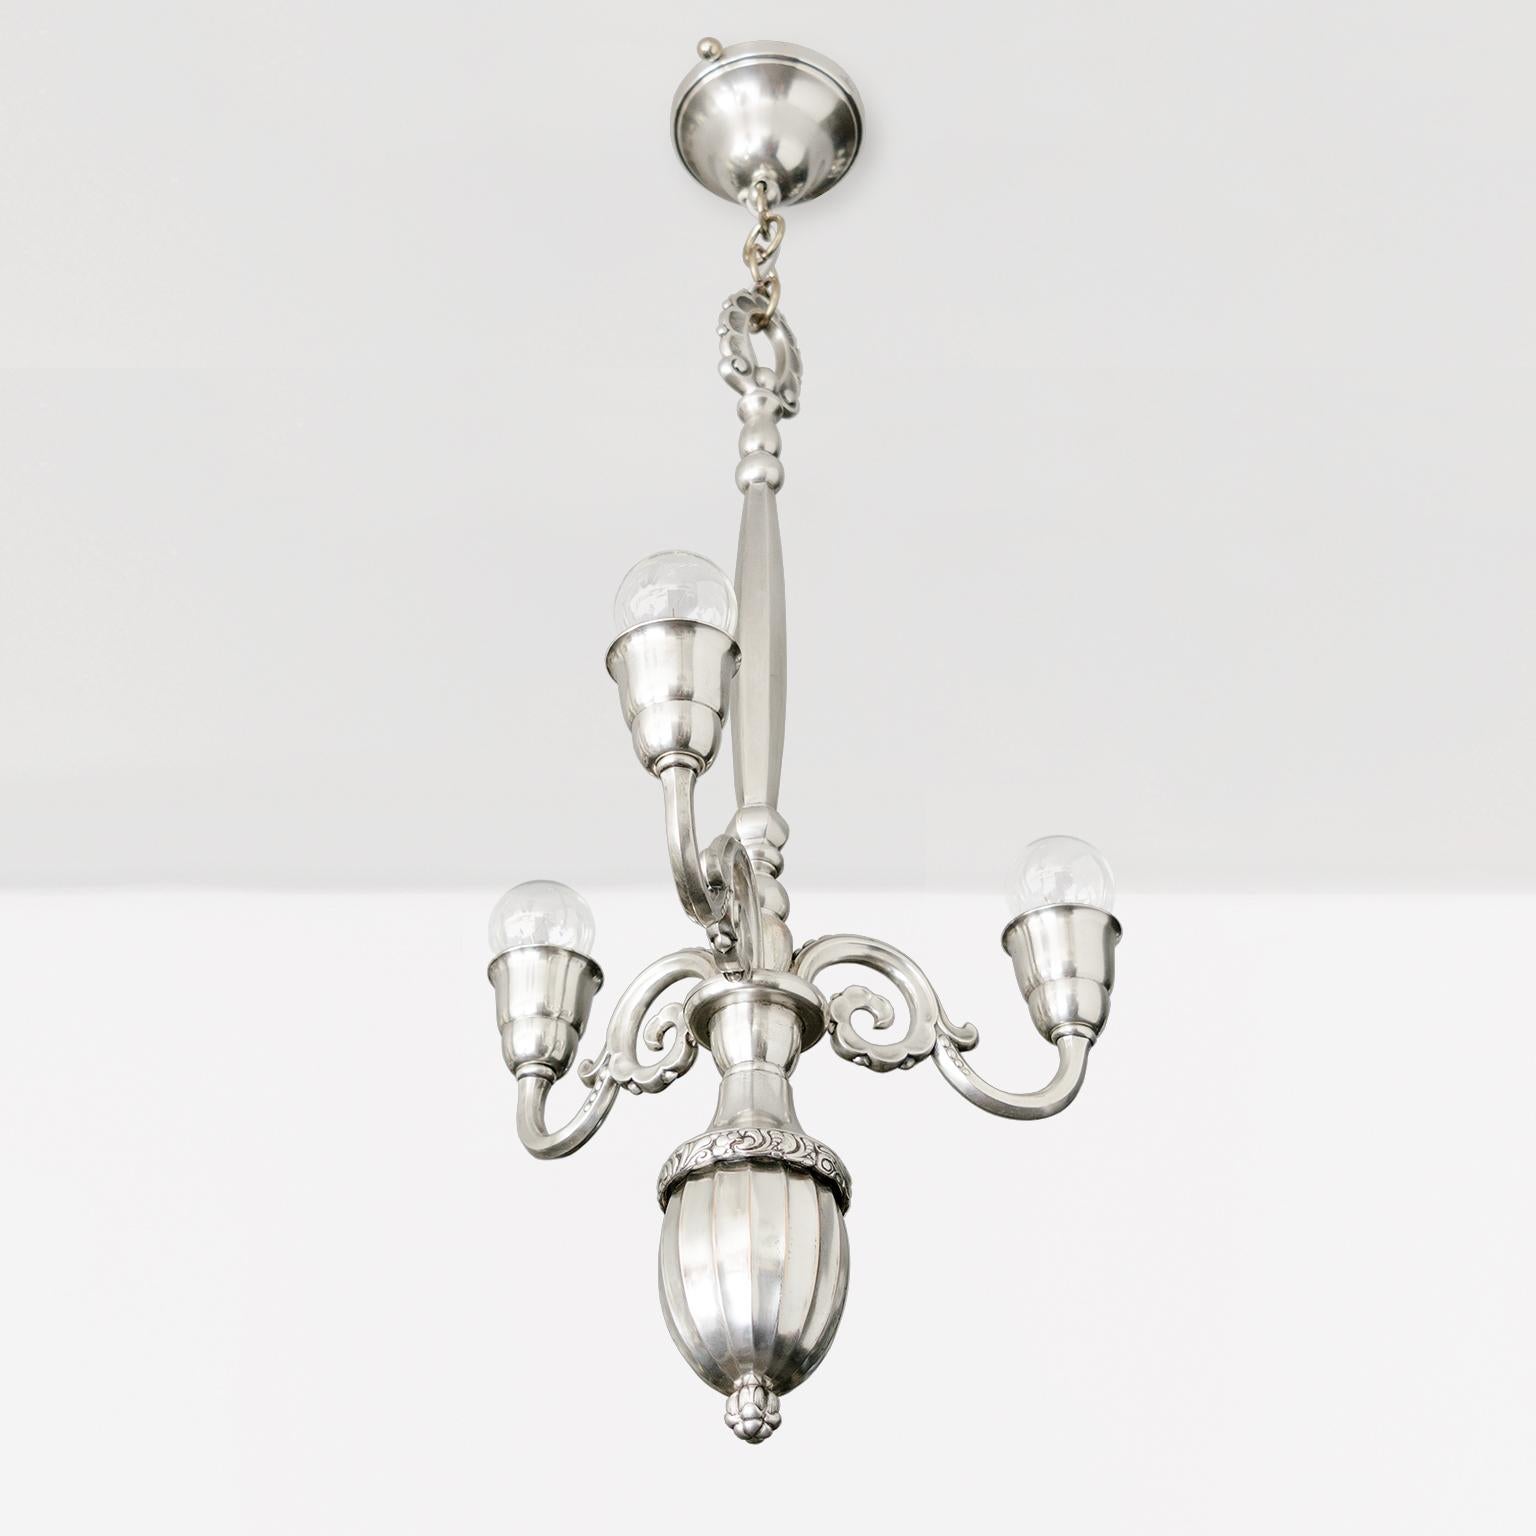 Early 20th Century Elis Bergh 3-Arm Silver Plated Chandelier for C.G. Hallberg, Sweden For Sale